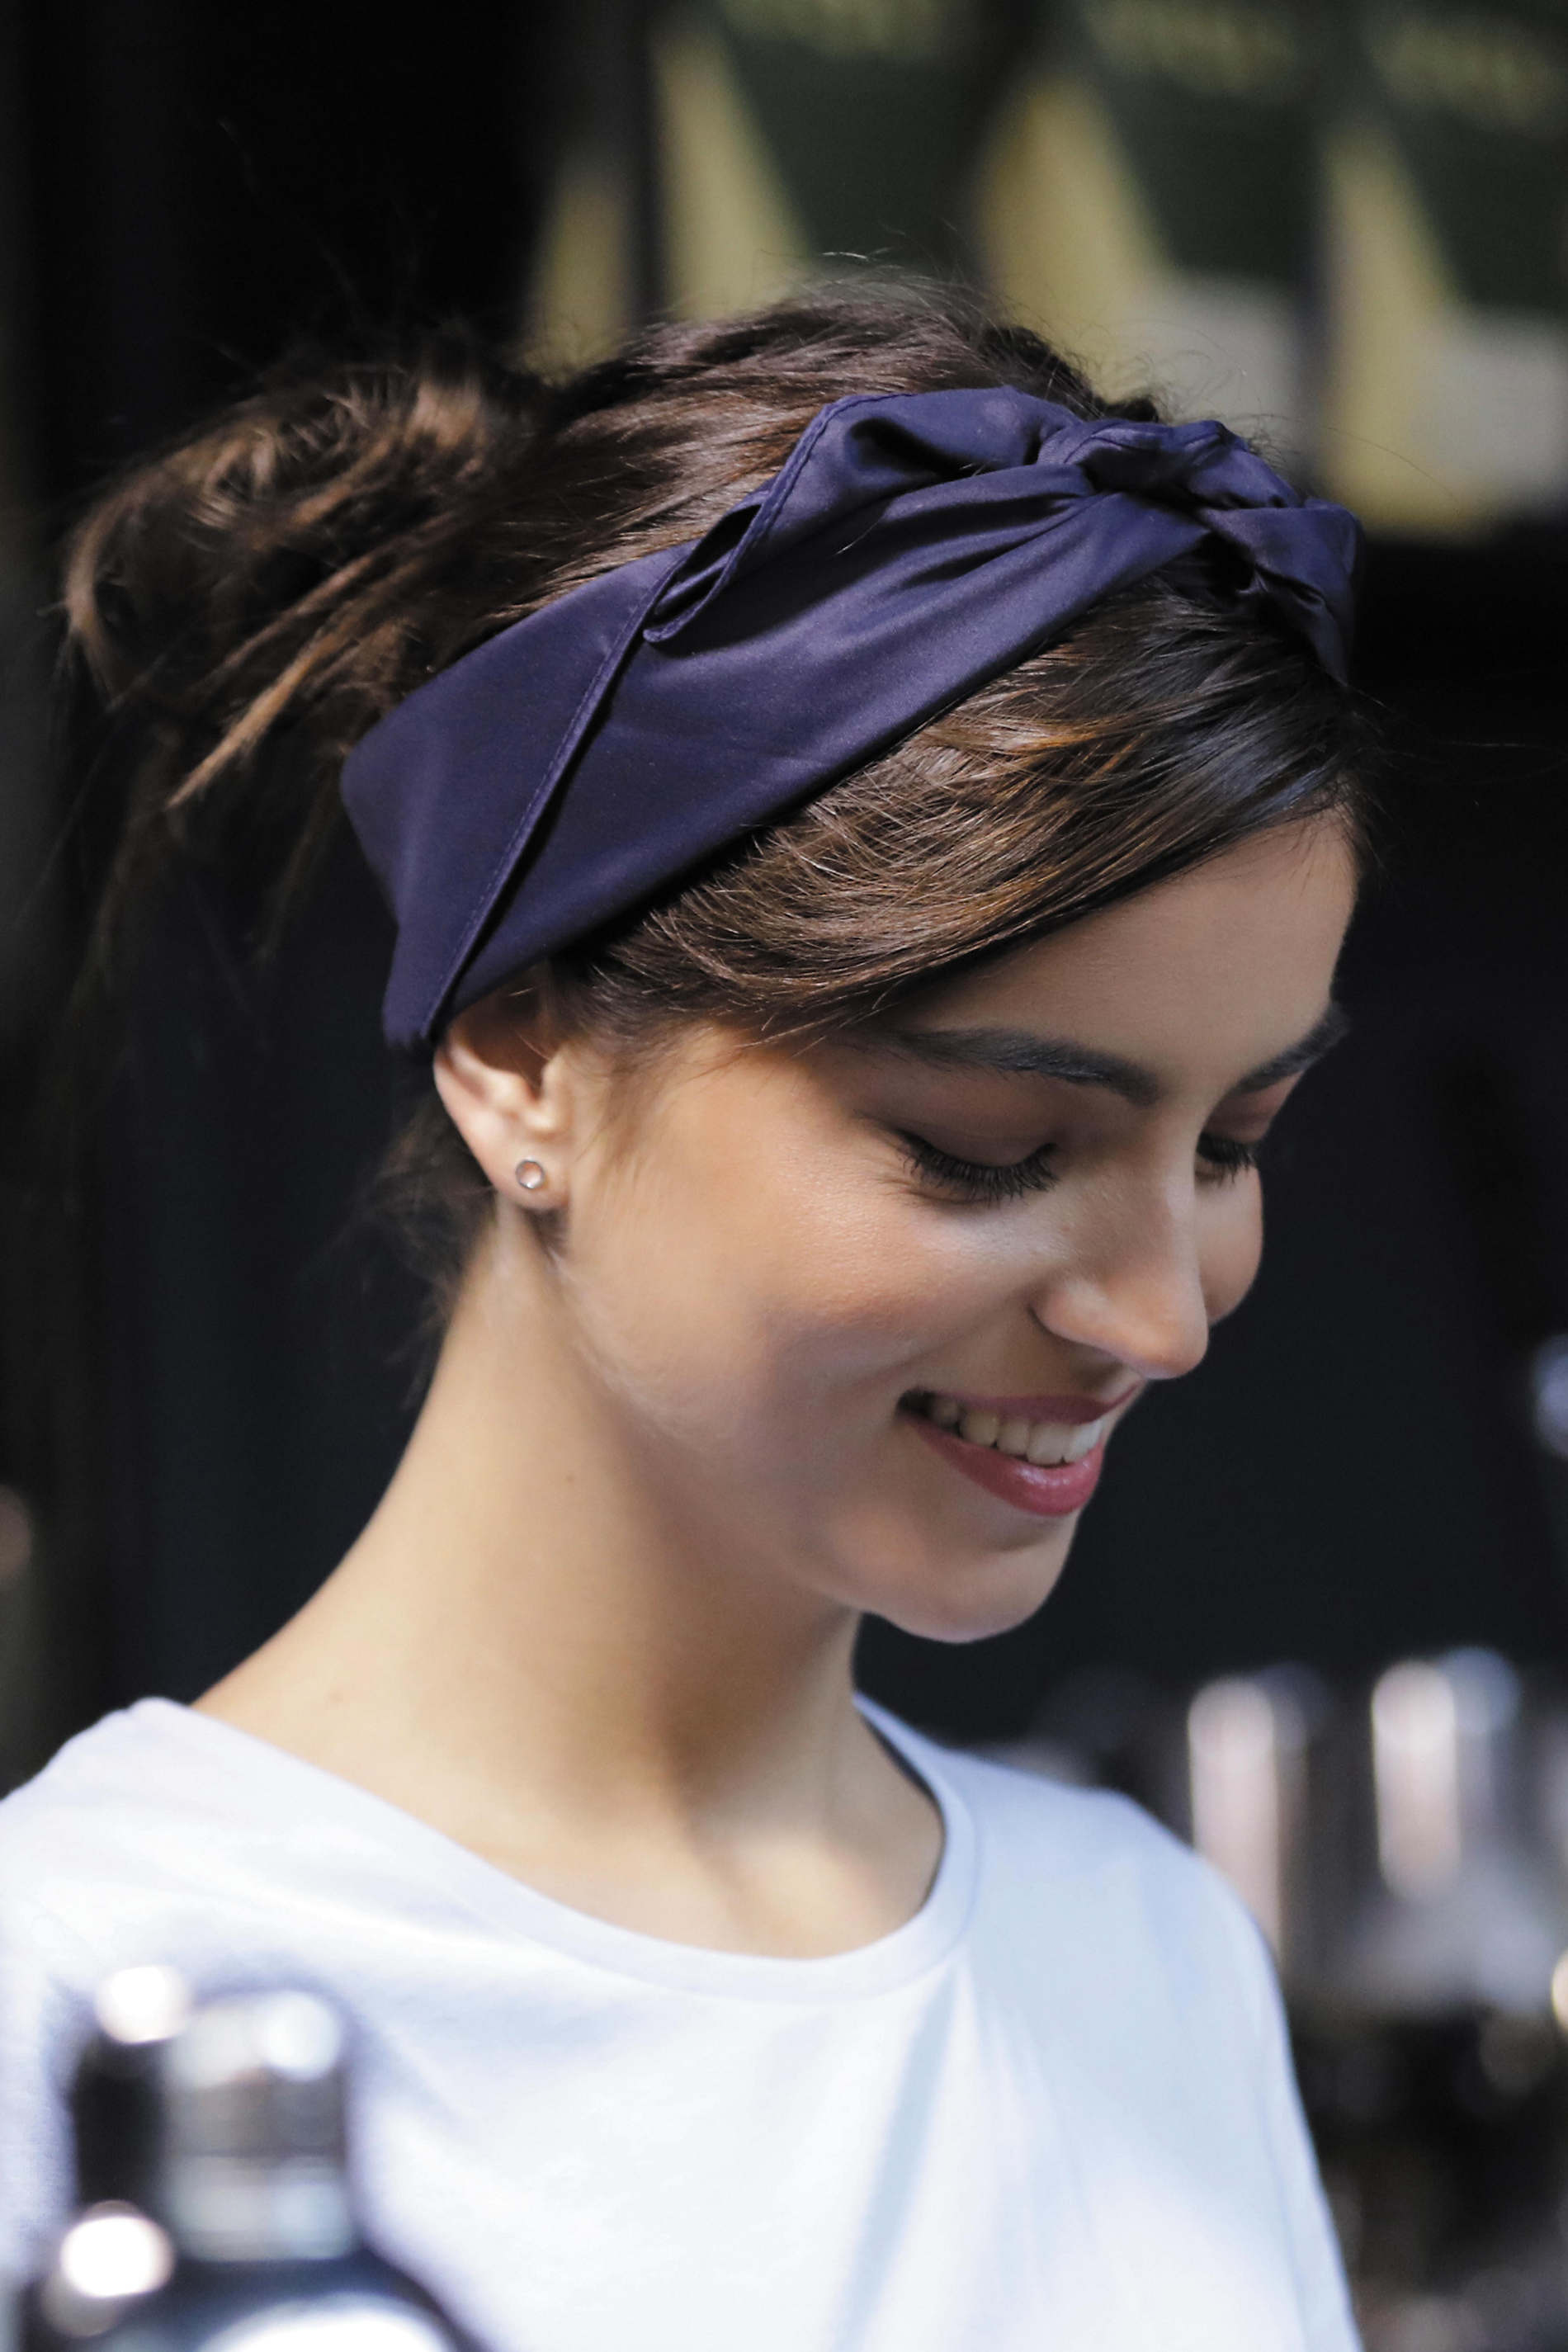 FOULARD<p>A timeless accessory of women’s wardrobe, the satin headscarf is a must-have that can be worn around the neck, as a belt or tied up in your hair.</p> NEOBLU TARA